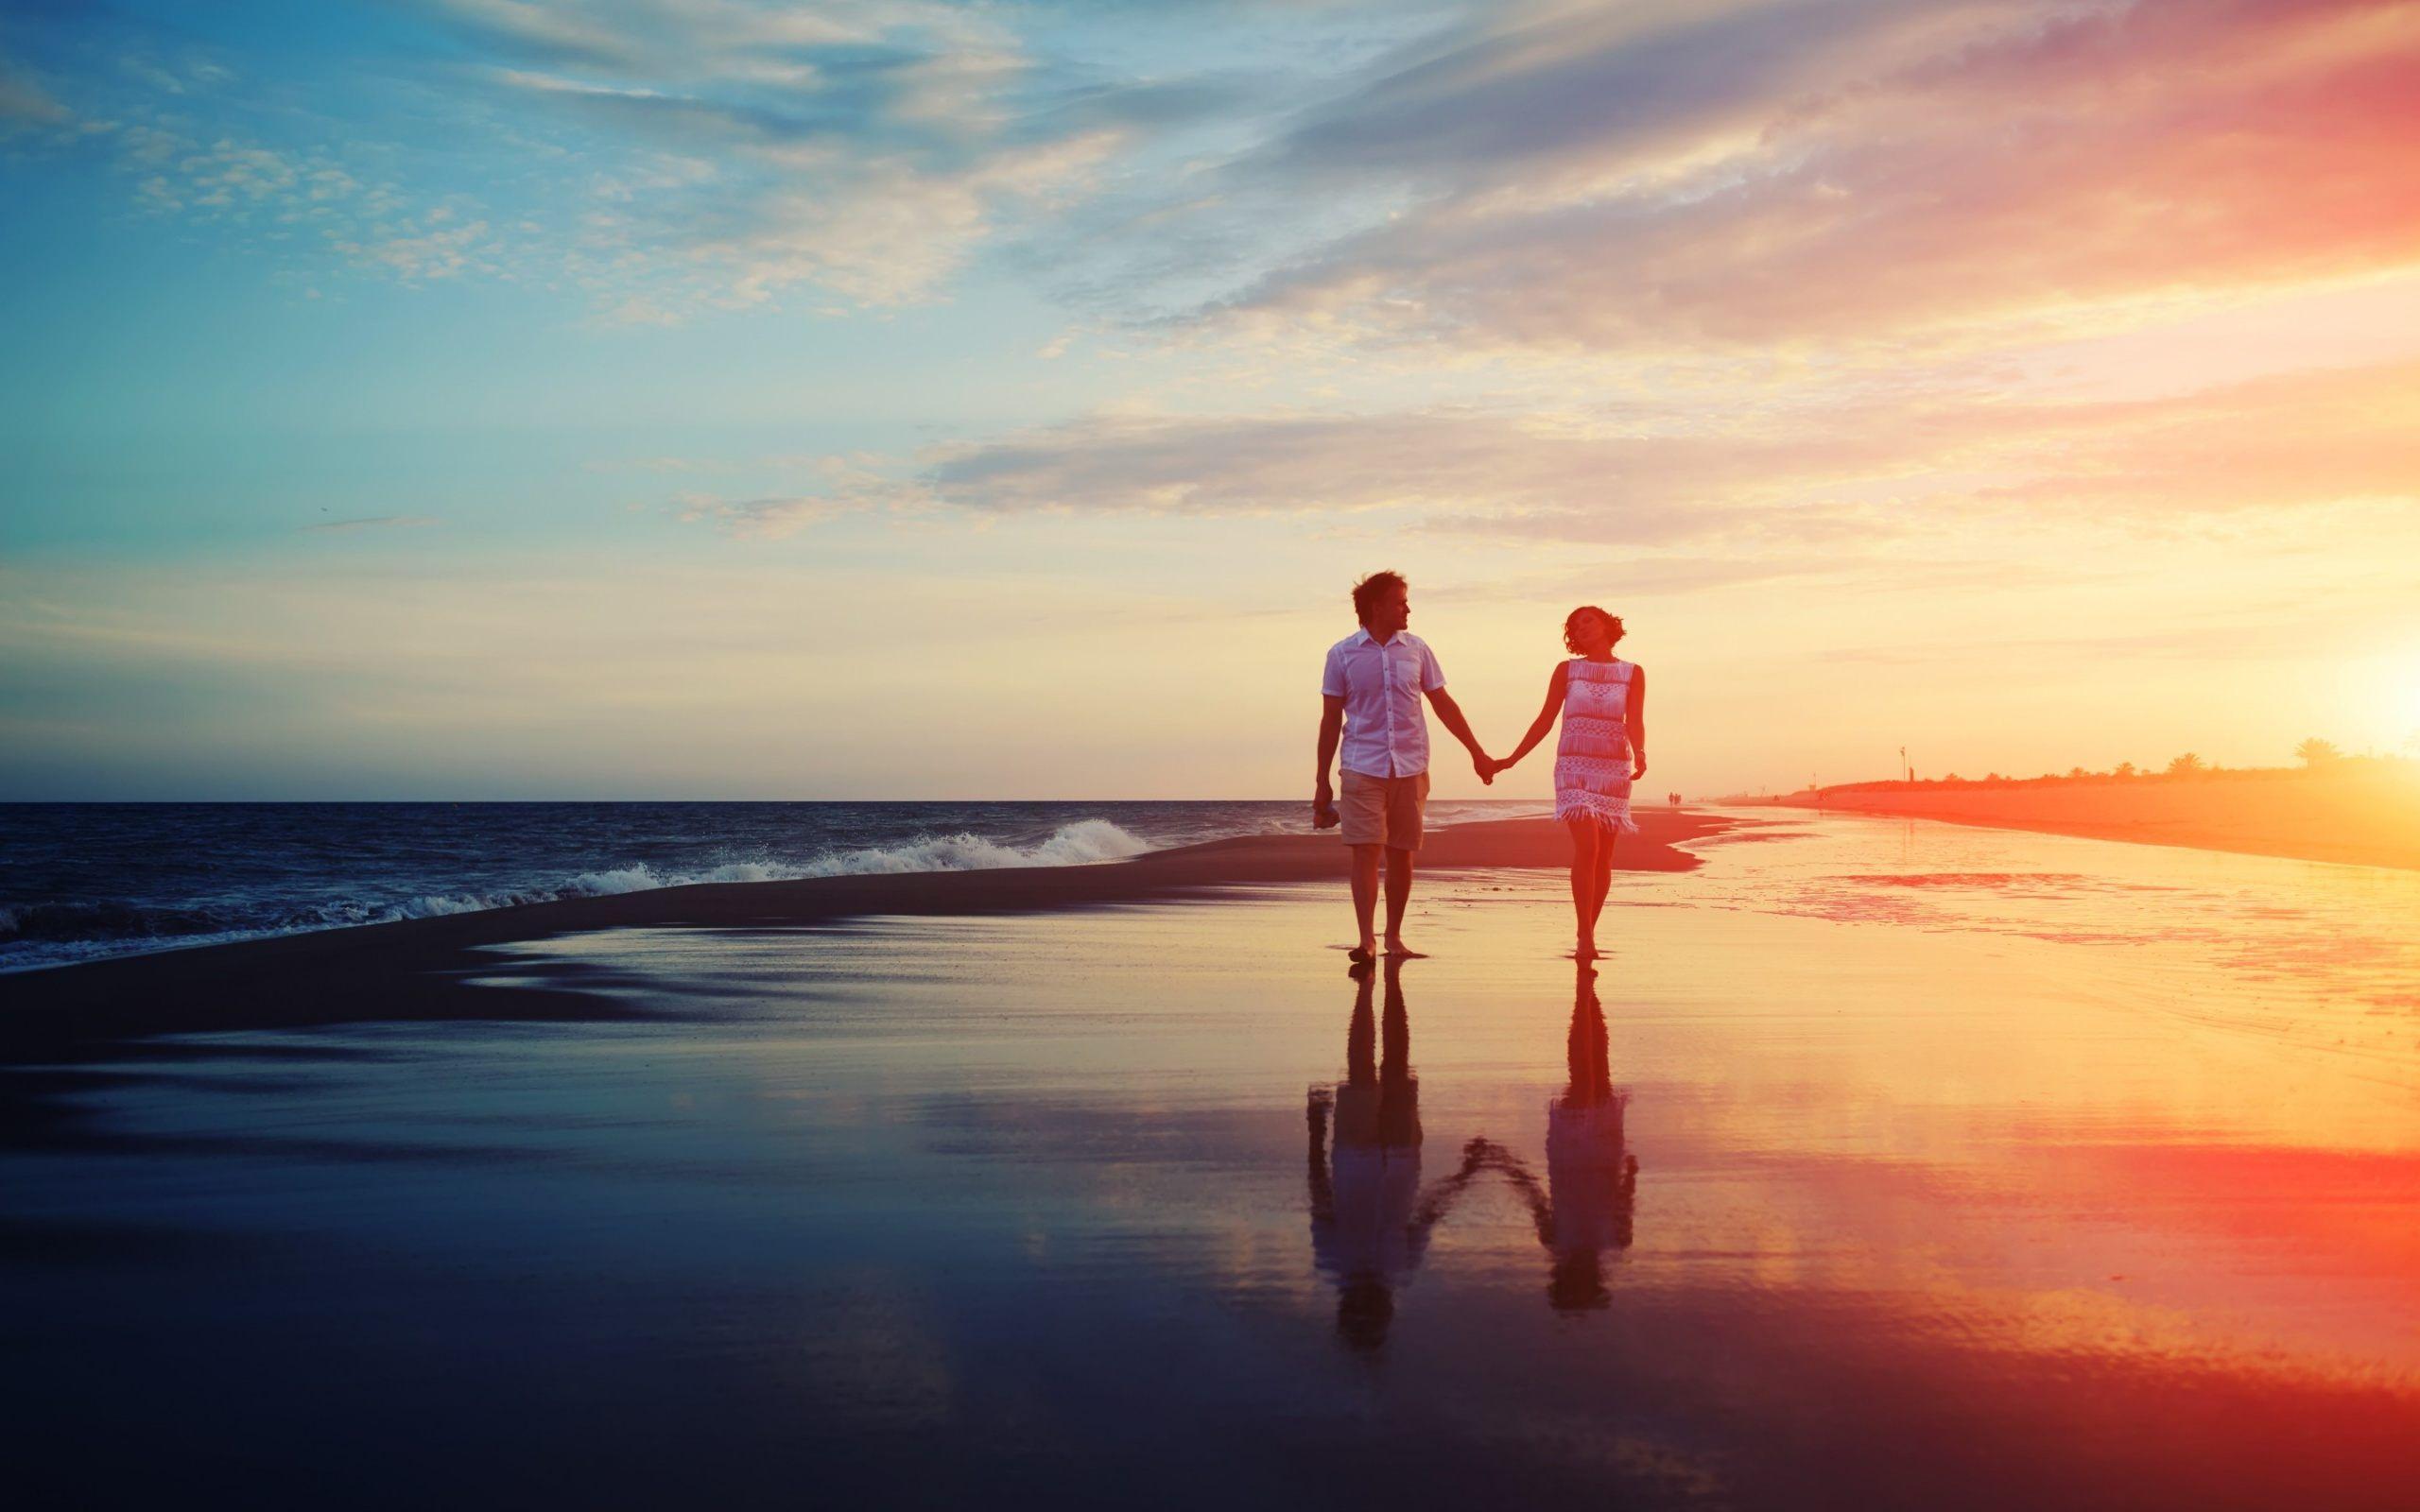 Couple On Beach Love Wallpaper HD Download For Desktop. Couples in love, Alternative wedding gifts, Sunset